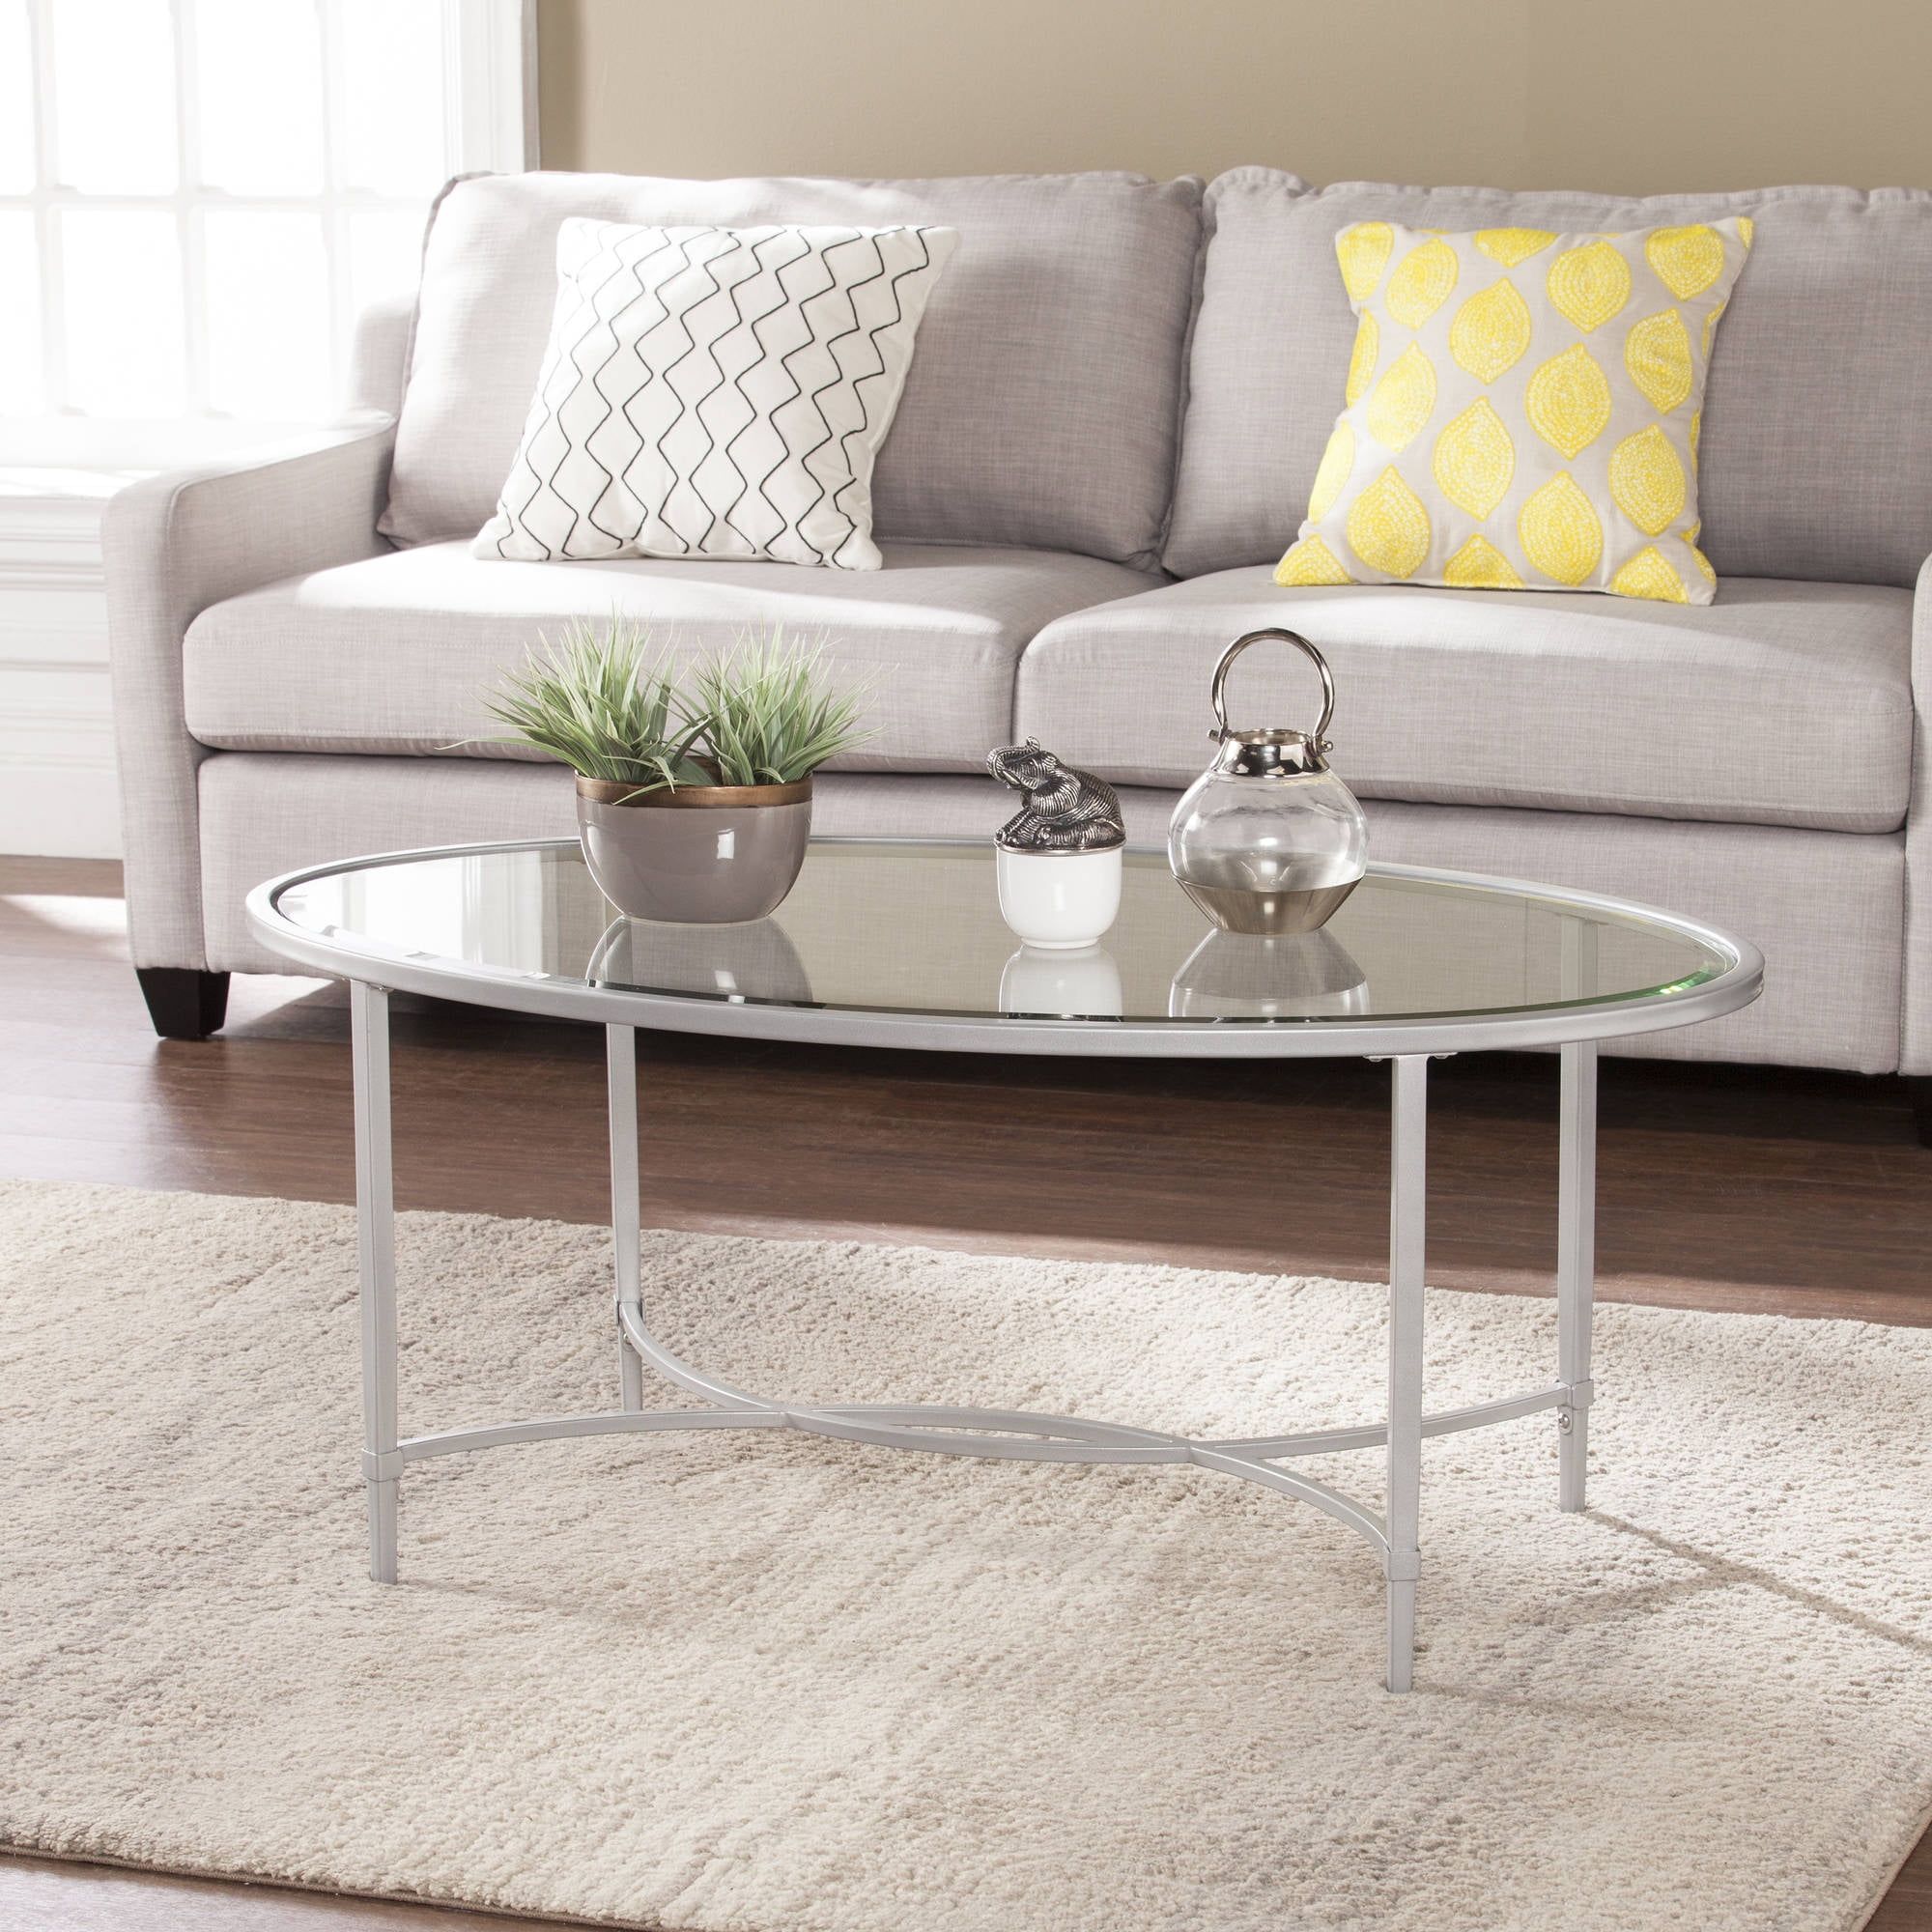 Quibilah Metal/glass Oval Coffee Table, Silver – Walmart Pertaining To Oval Glass Coffee Tables (View 6 of 15)